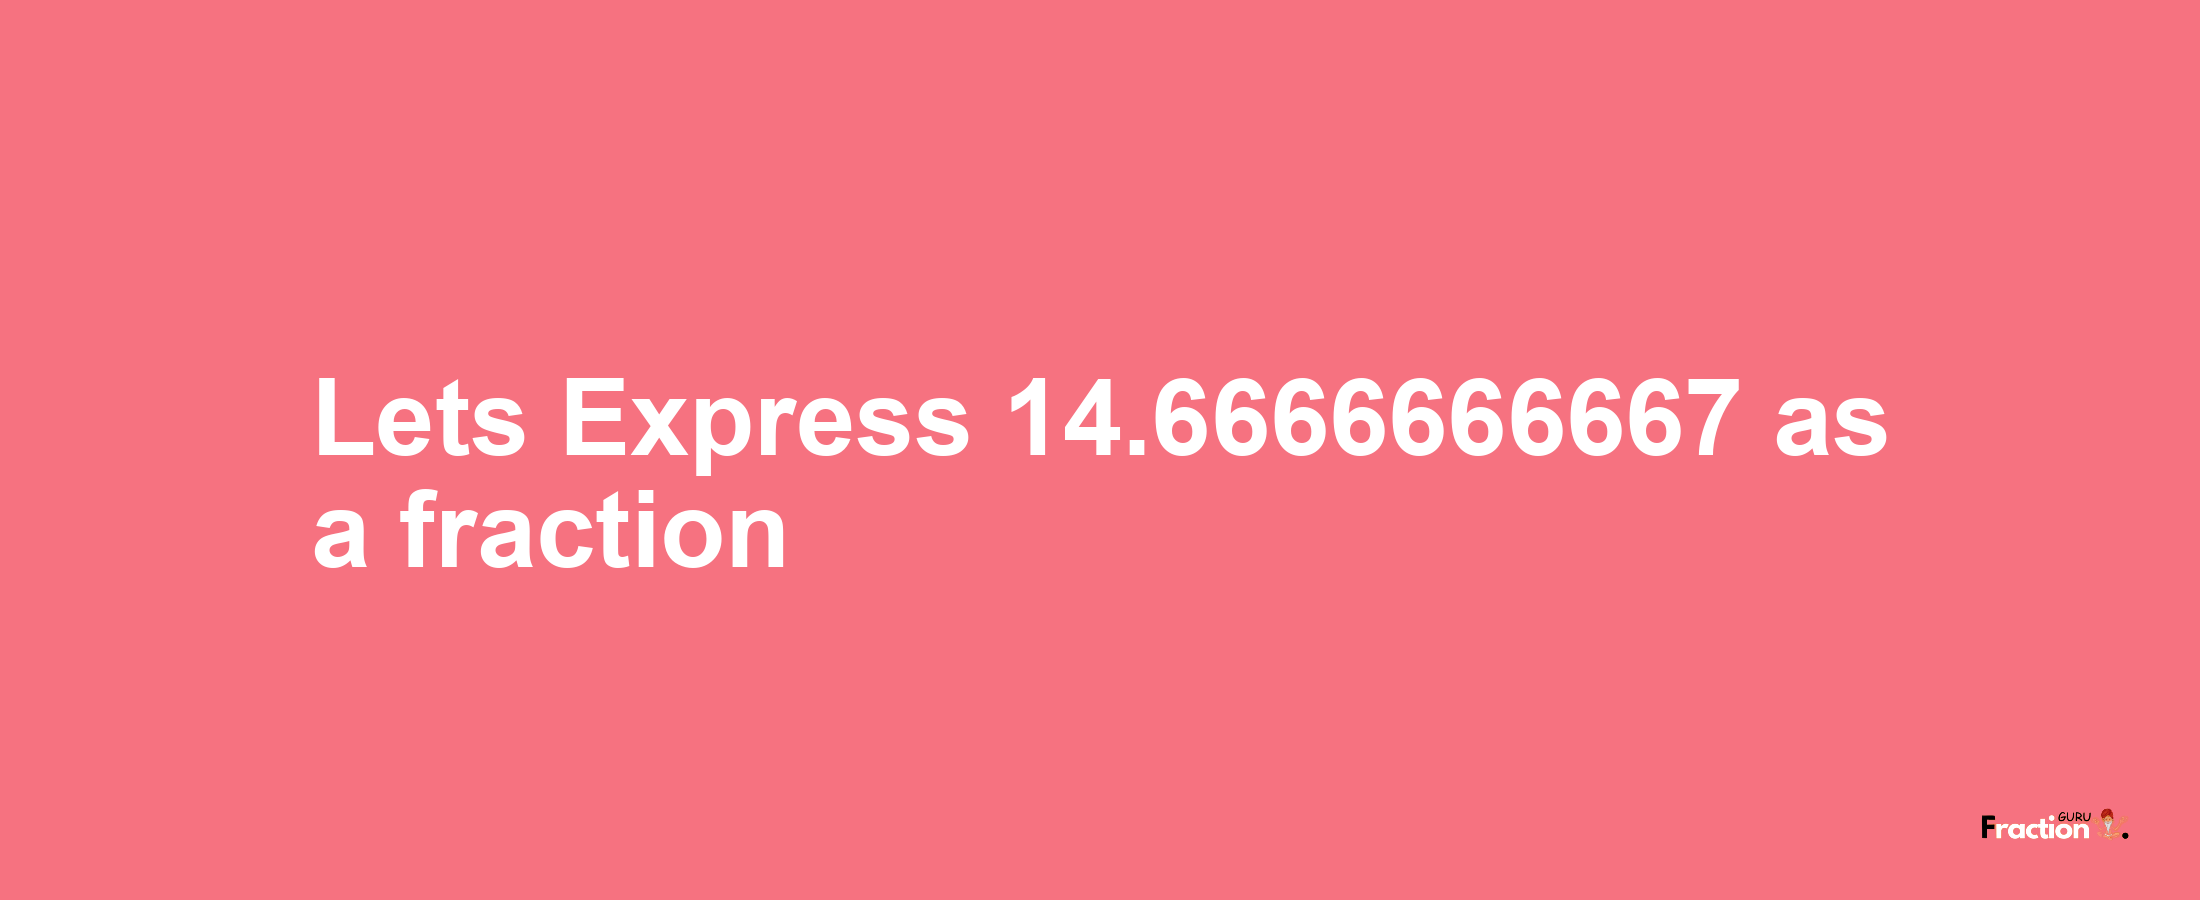 Lets Express 14.6666666667 as afraction